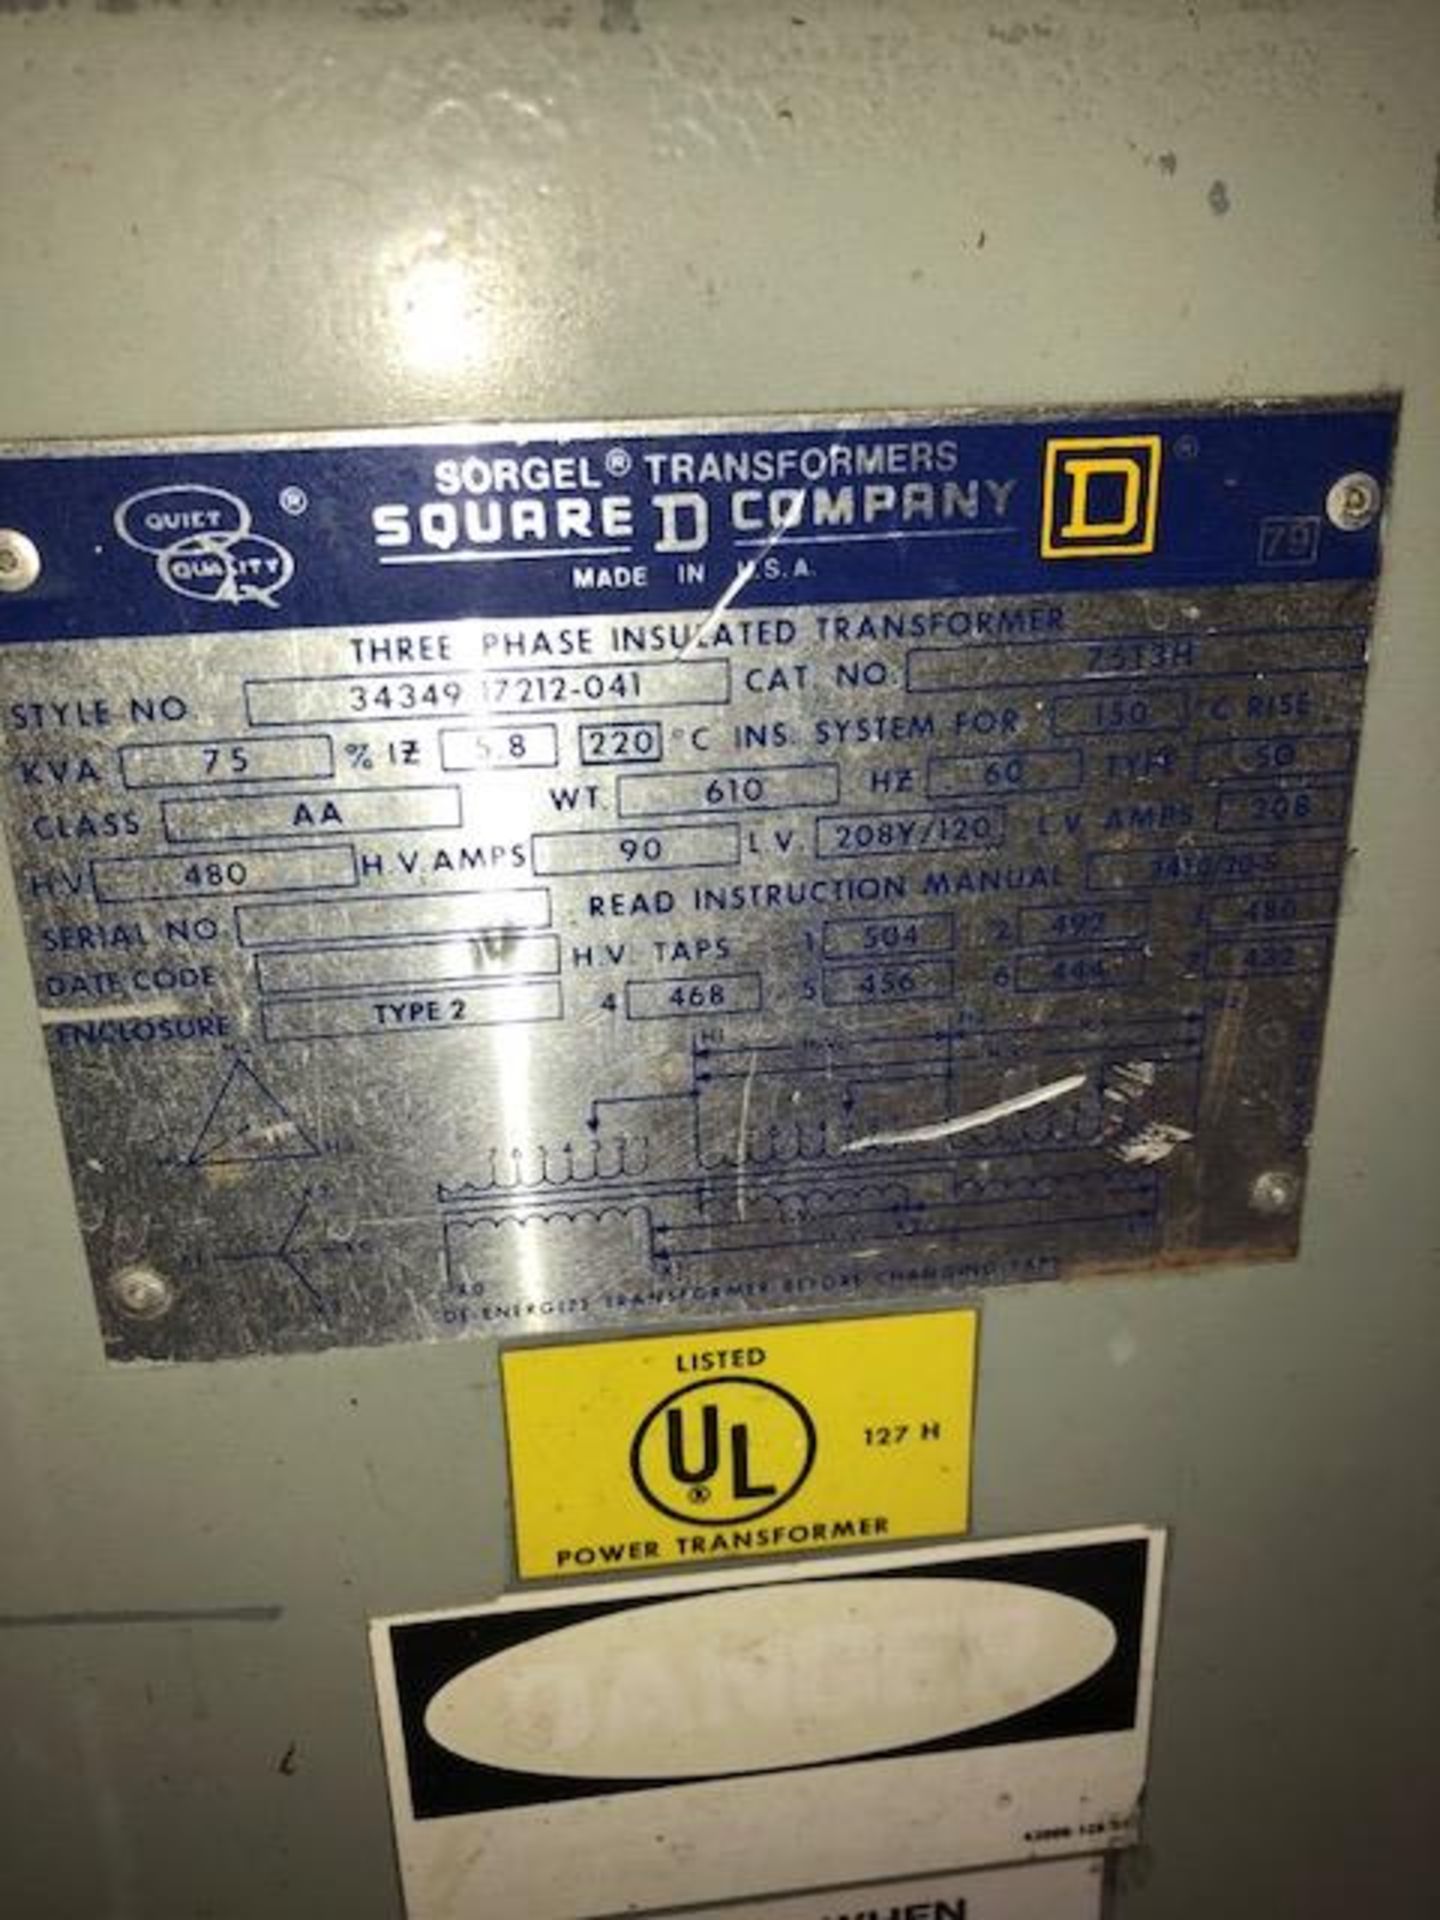 Square D Transformer, Style 34349-17212-041, CAT No.: 75T3H, 75 KVA, 3 Phase - Image 2 of 2